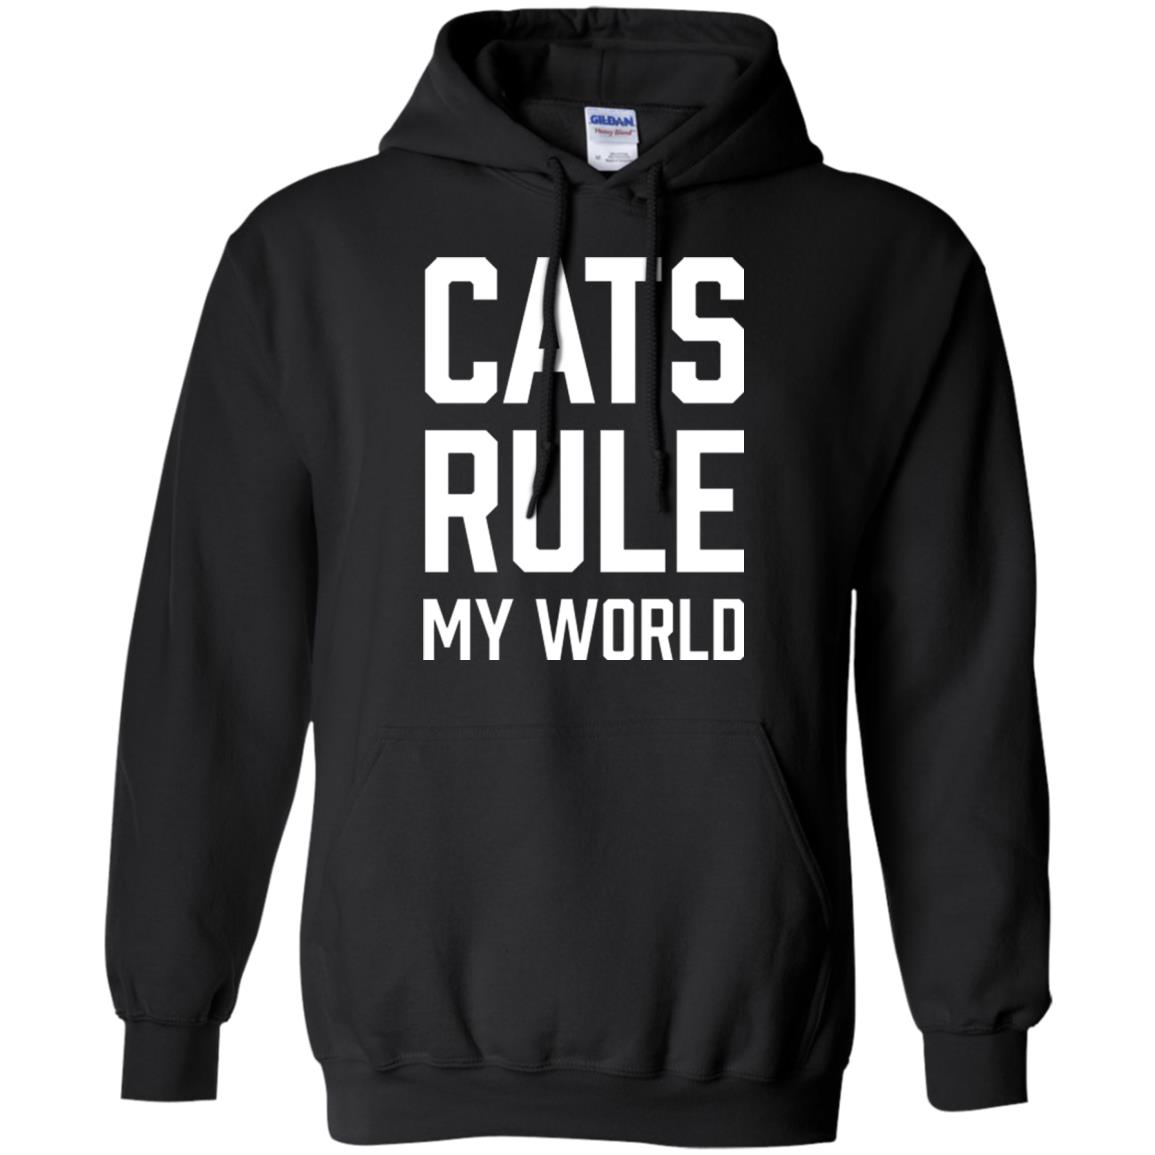 Cats Rule My World Pullover Hoodie Black - iHeartCats.com